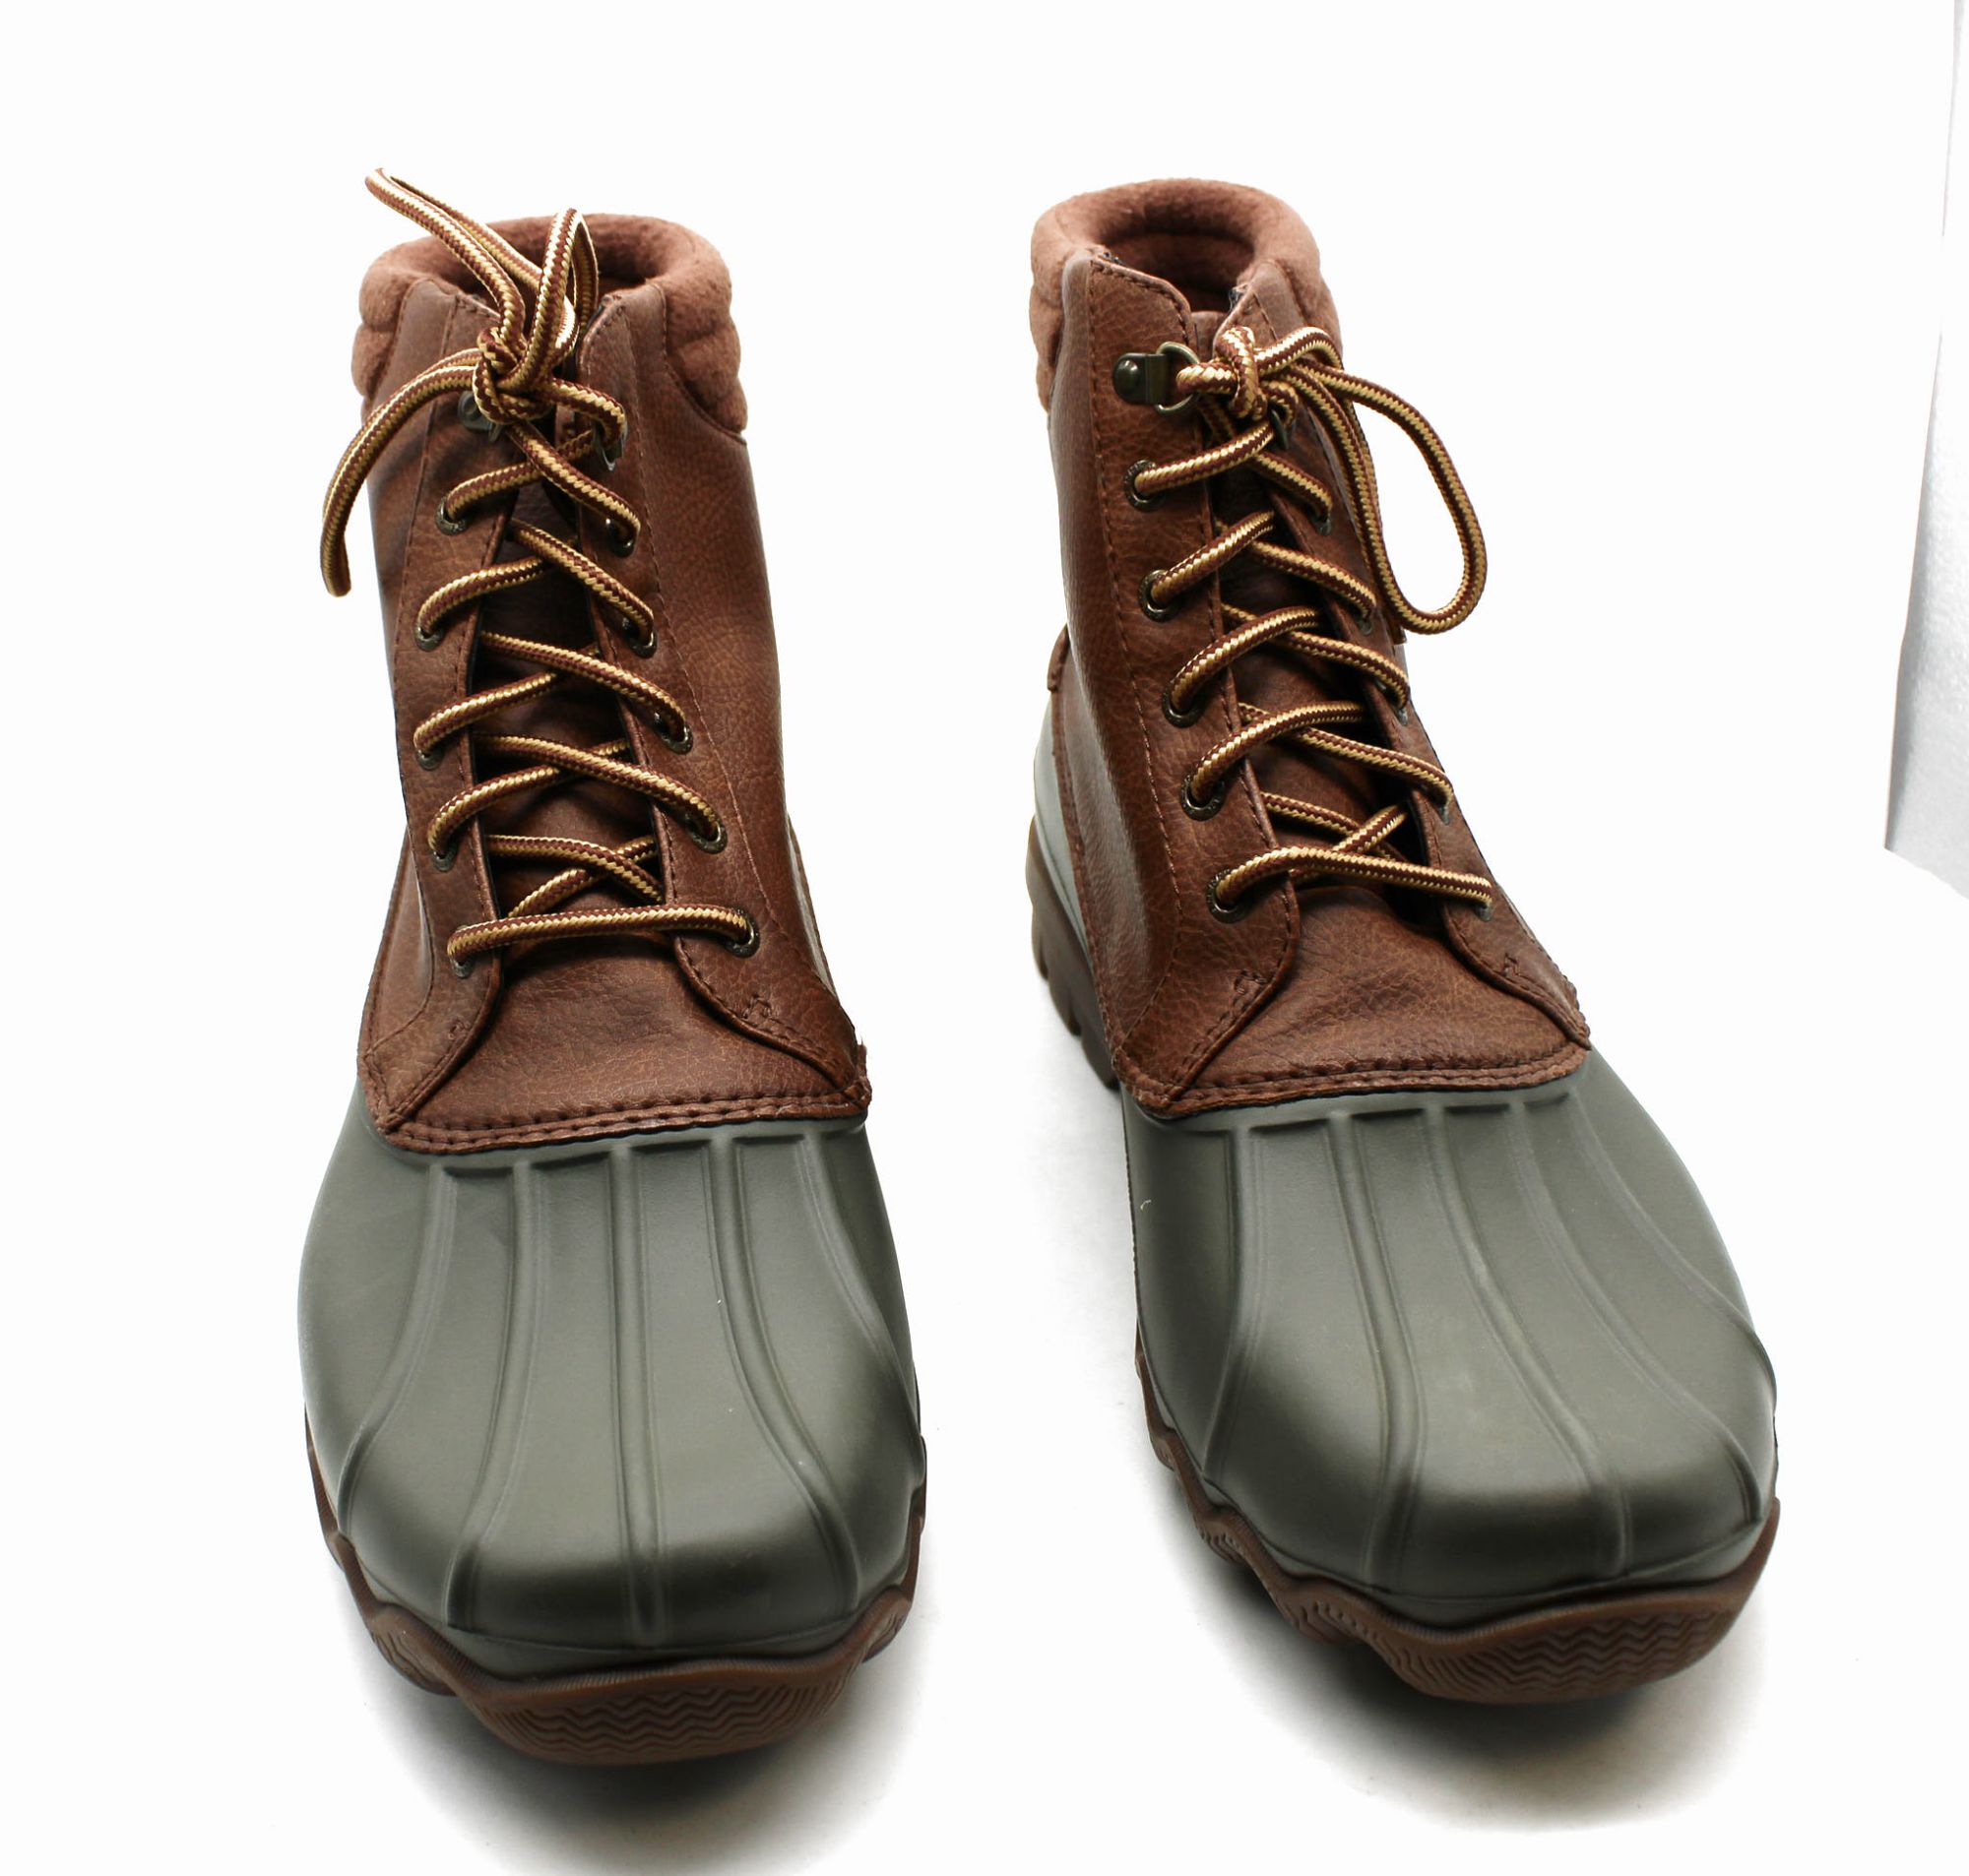 Sperry Men's Avenue Duck Boots - Classic Style and Weather